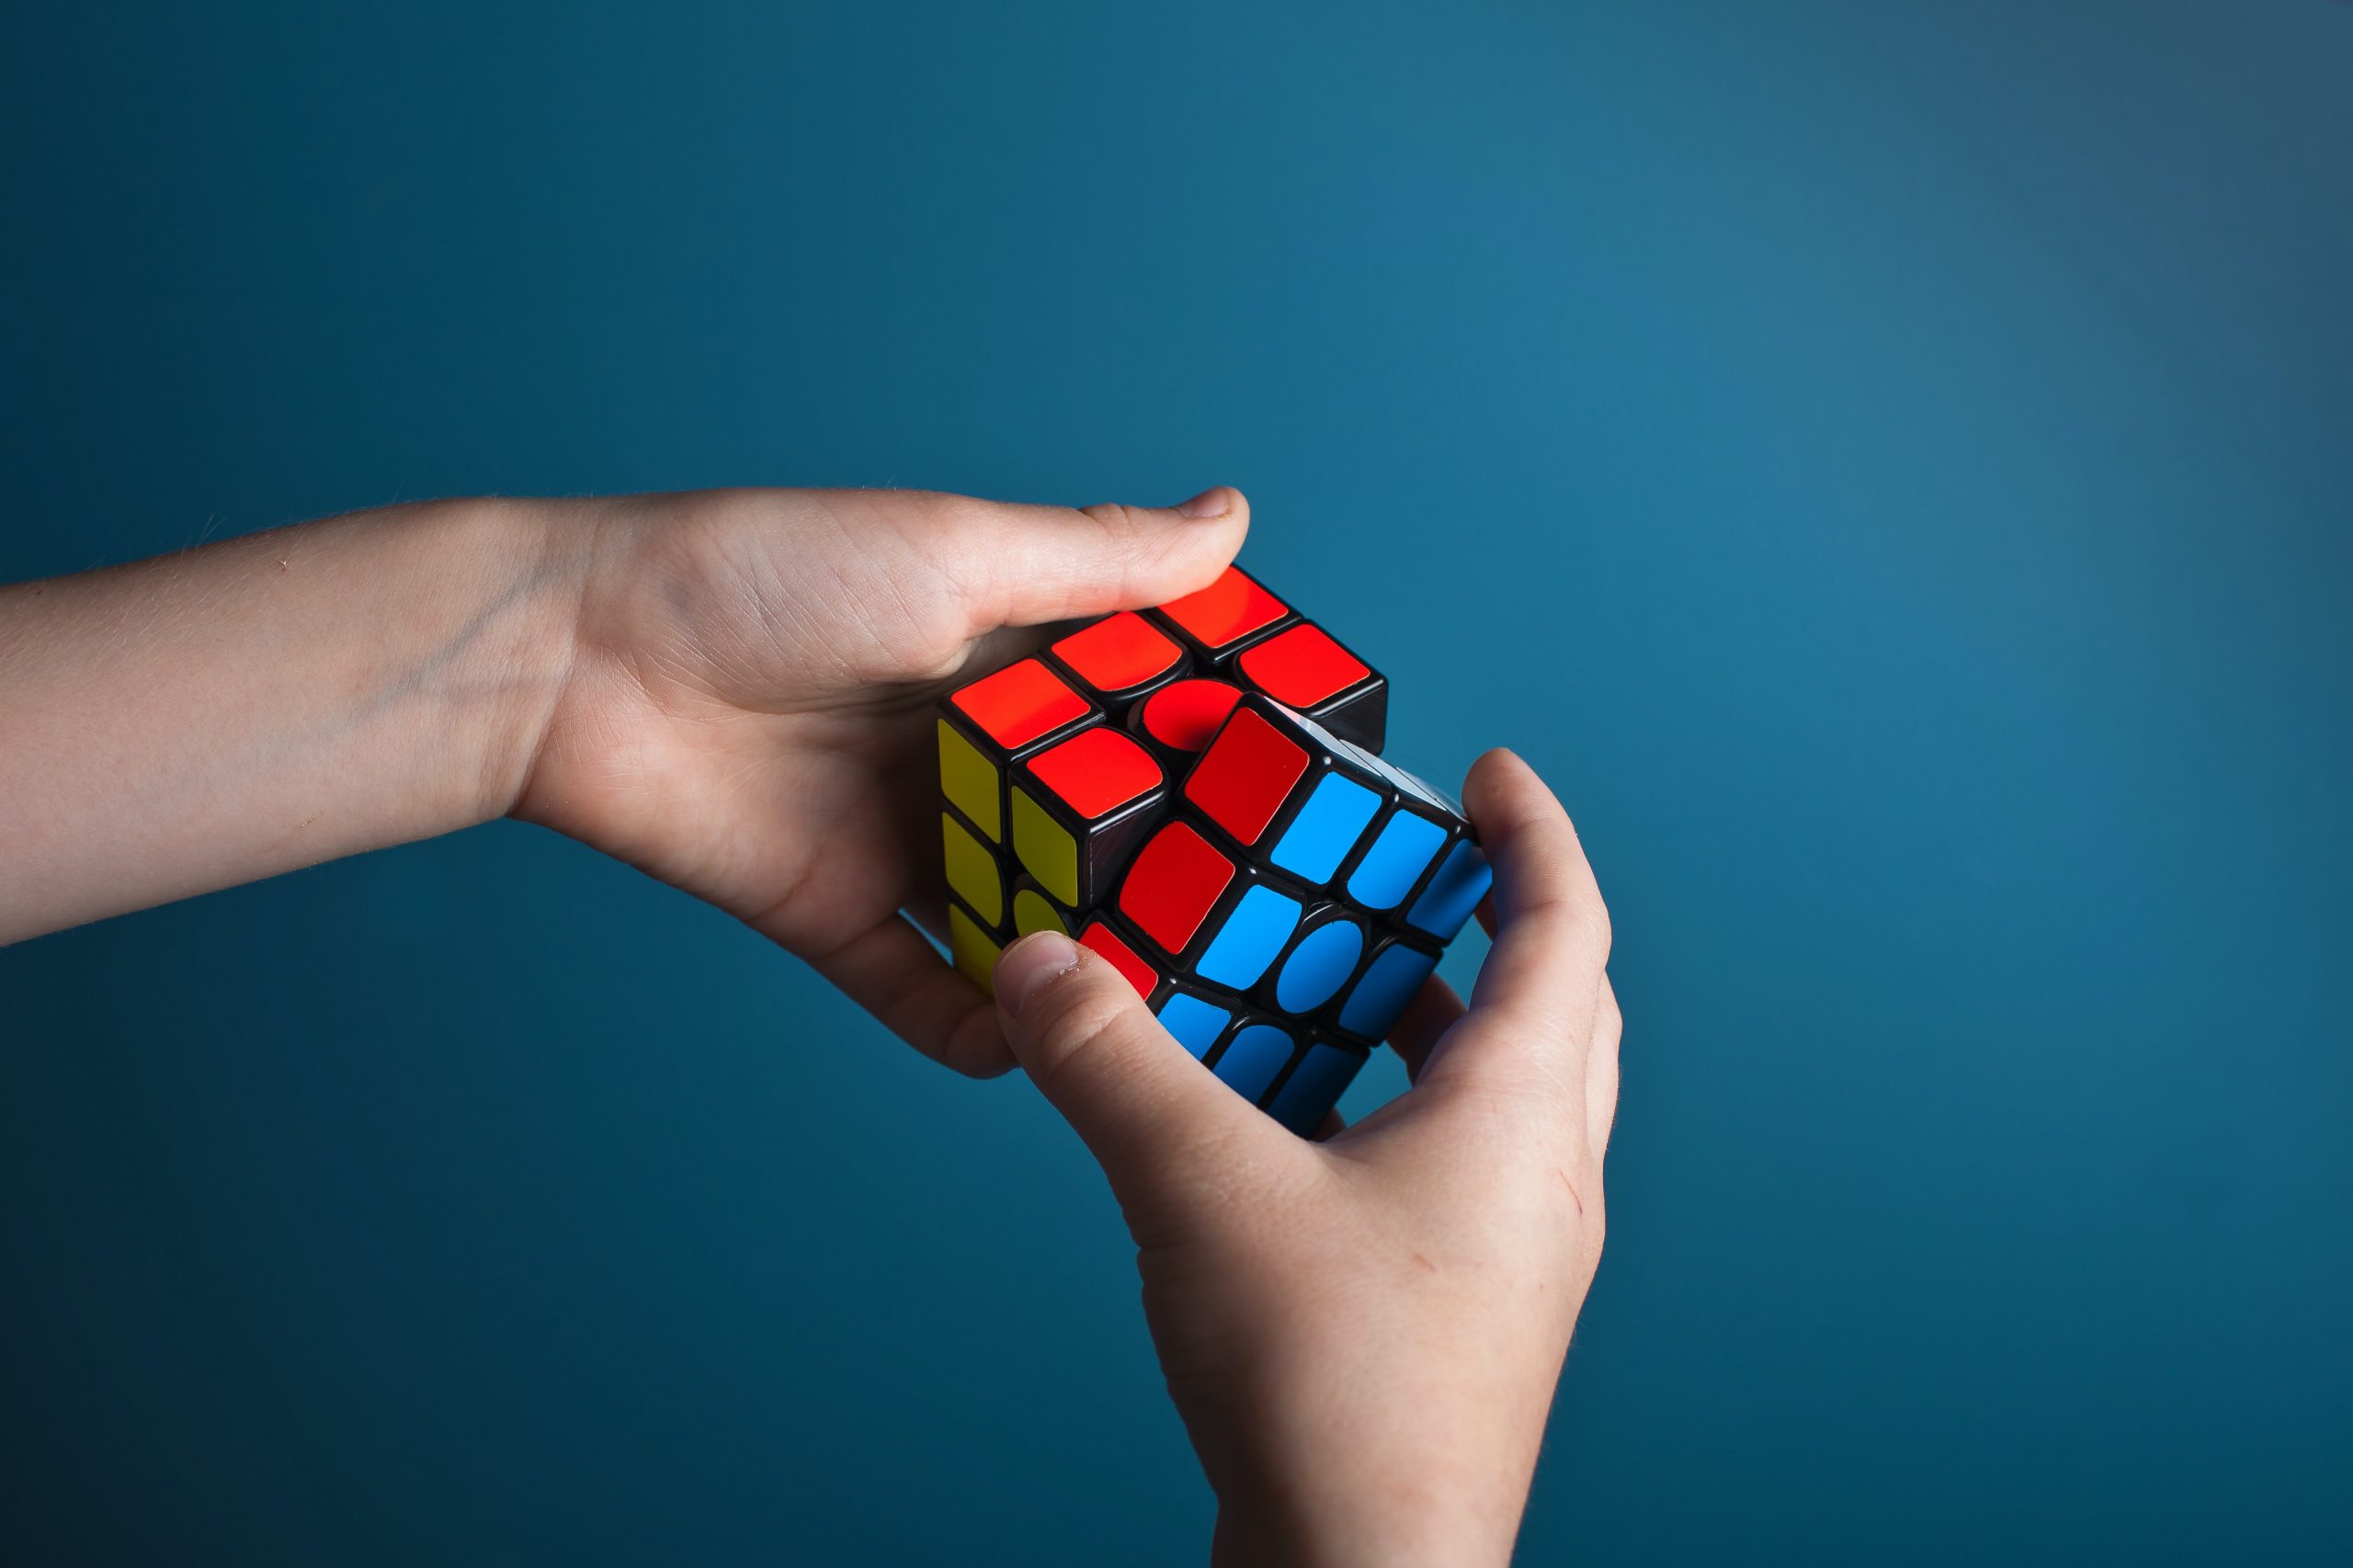 Rubics cube that emulates the problems that business need to solve to thrive